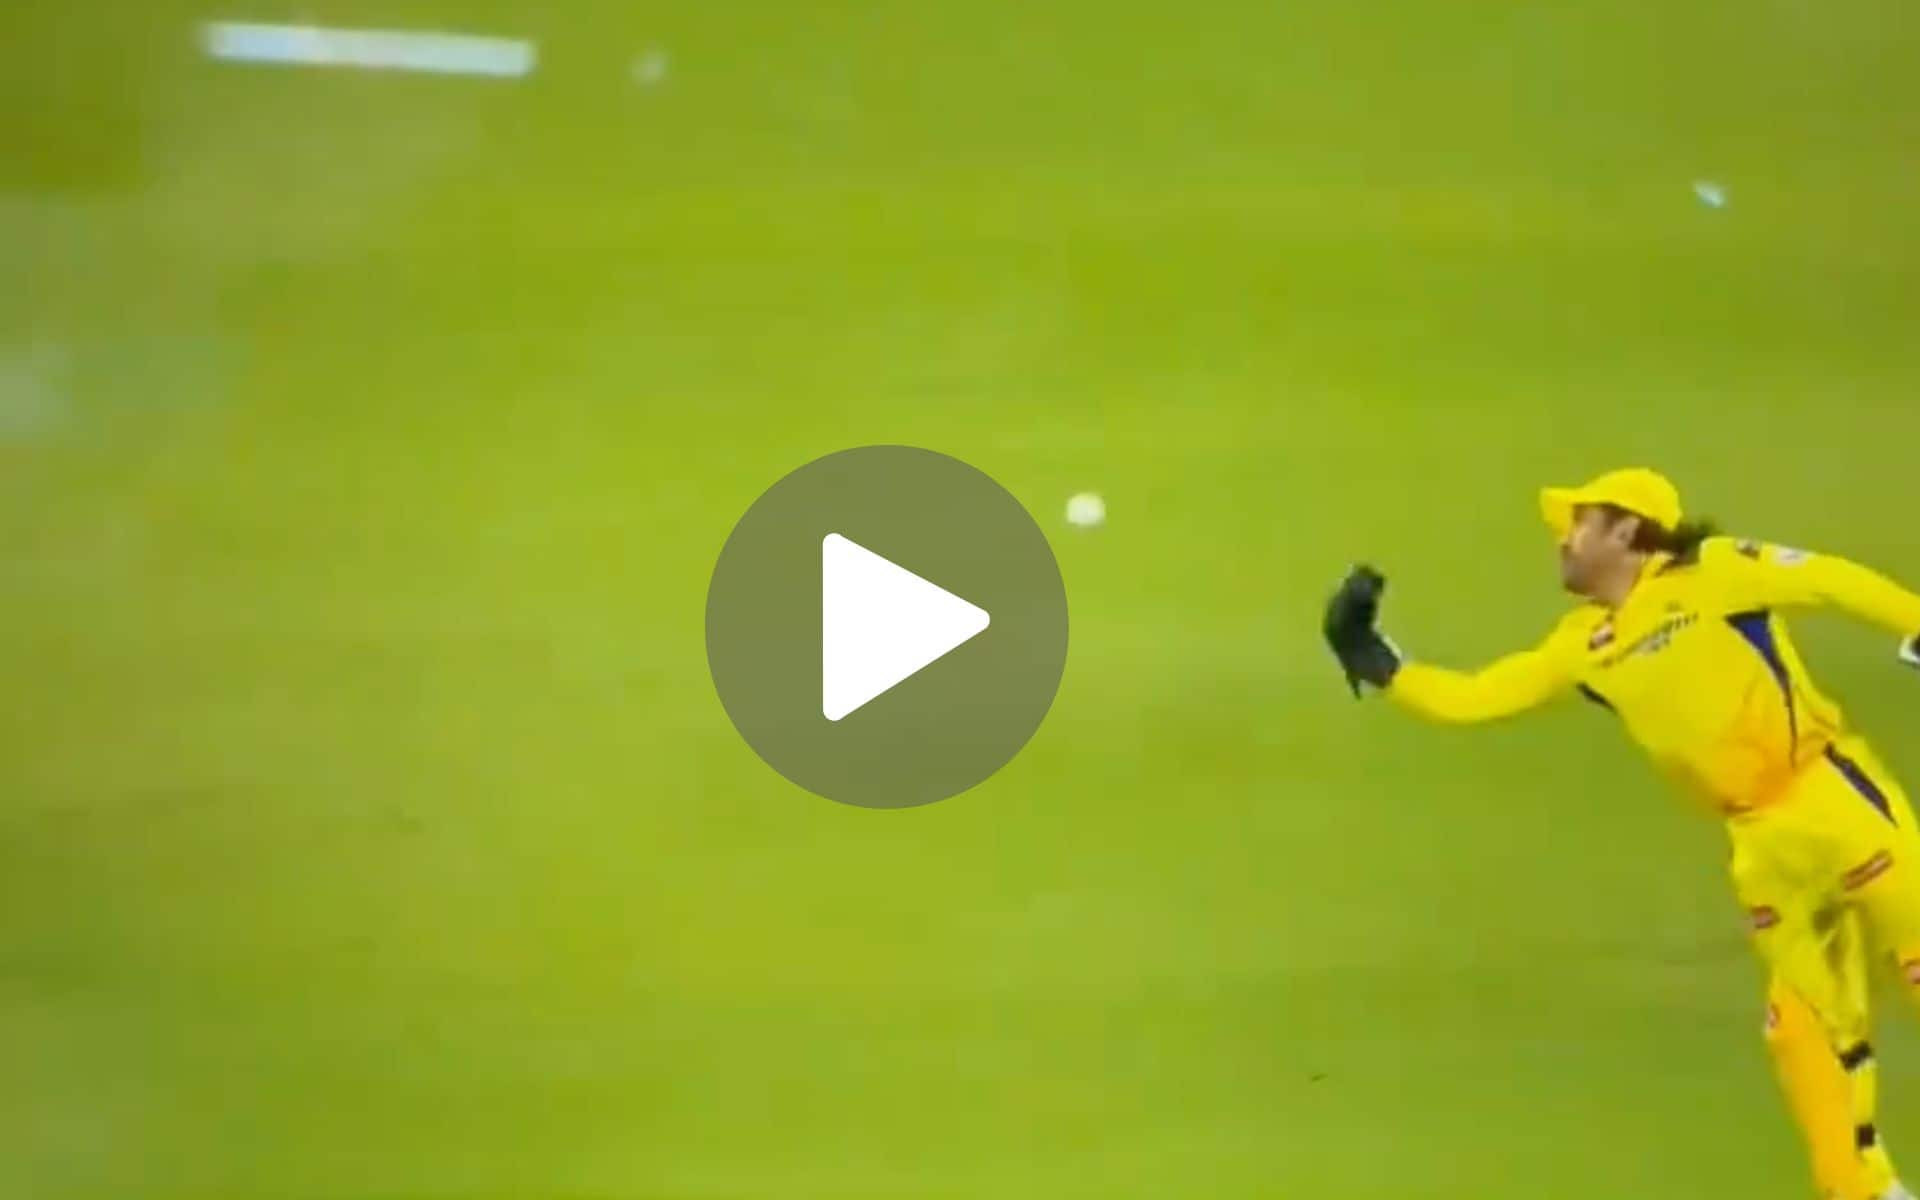 [Watch] MS Dhoni Disappoints Fans With An Easy Peasy Catch Drop In Farewell IPL Season